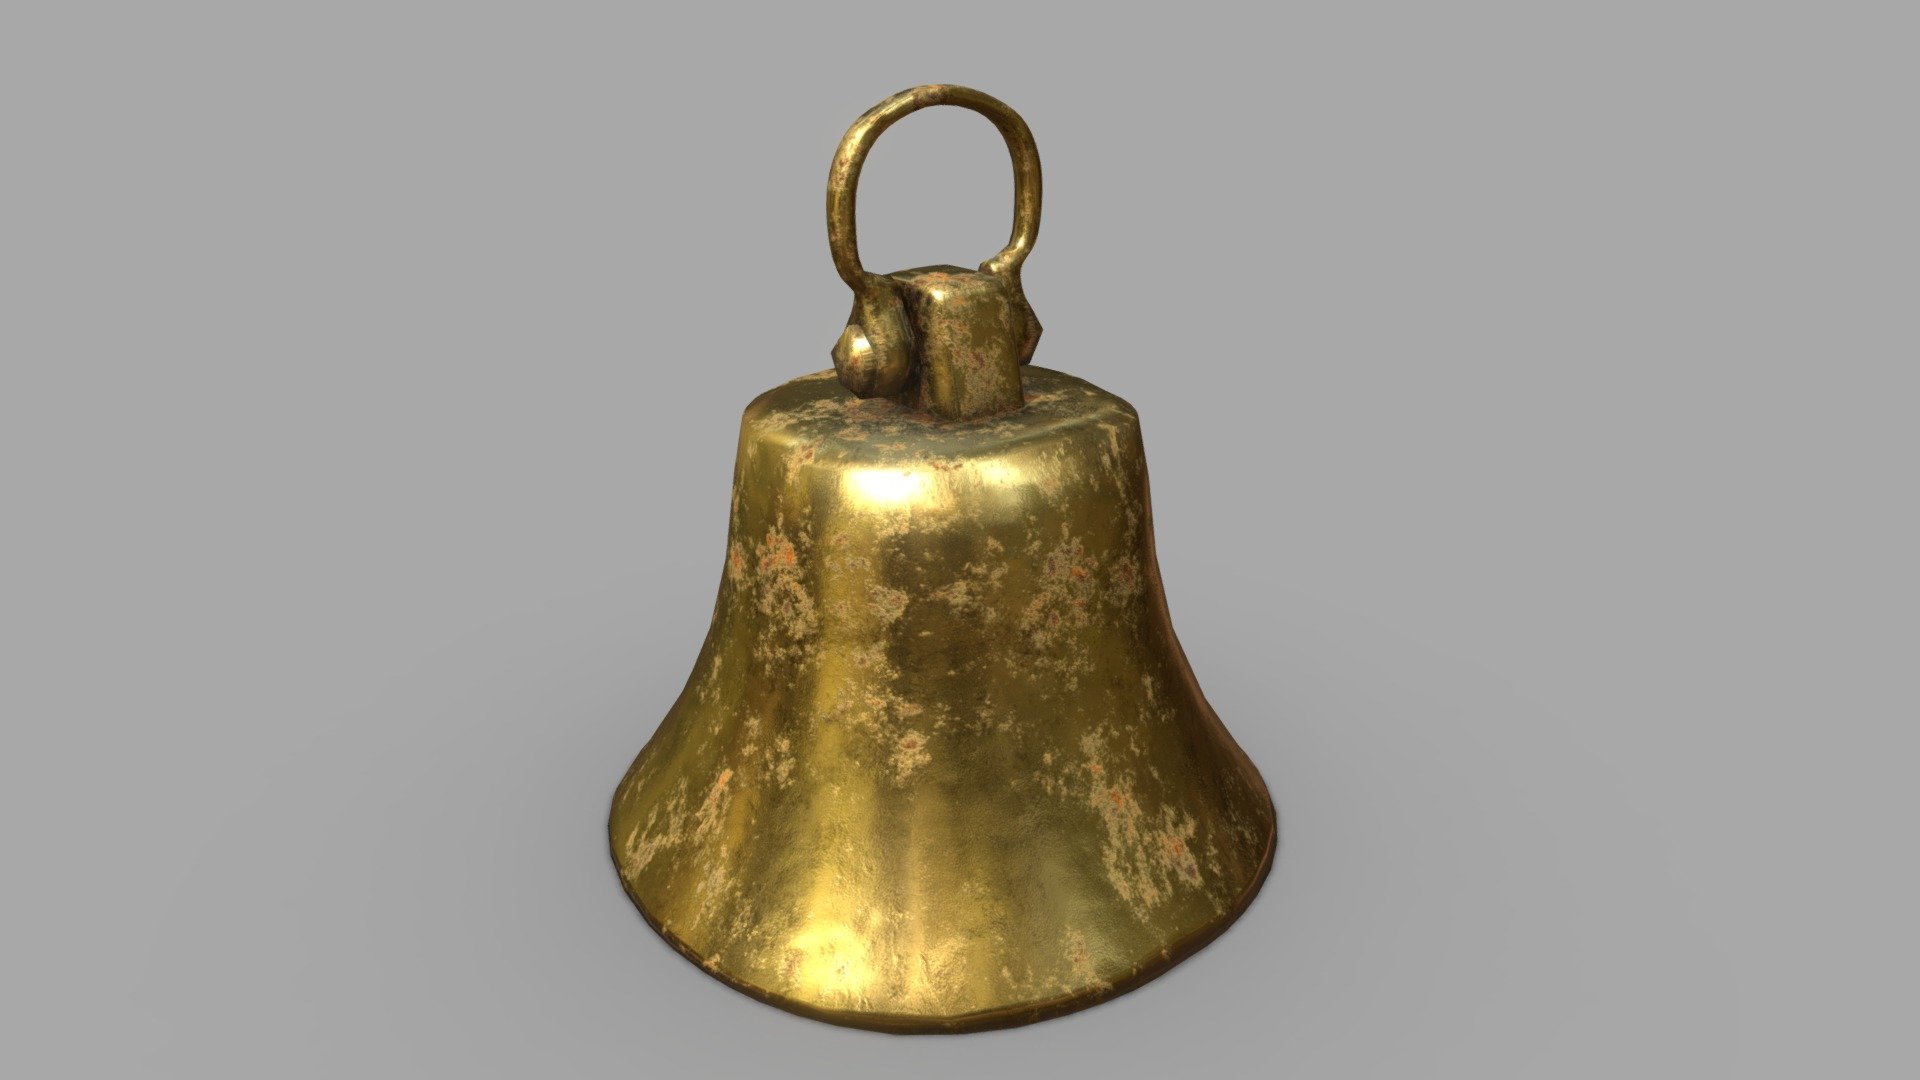 A quick model of a rusty bell.

If you like my content, and would like to support my work, please donate, I'd greatly appreciate it. https://www.paypal.me/jQueary - Bell - Download Free 3D model by jQueary (@jqueary1991) 3d model